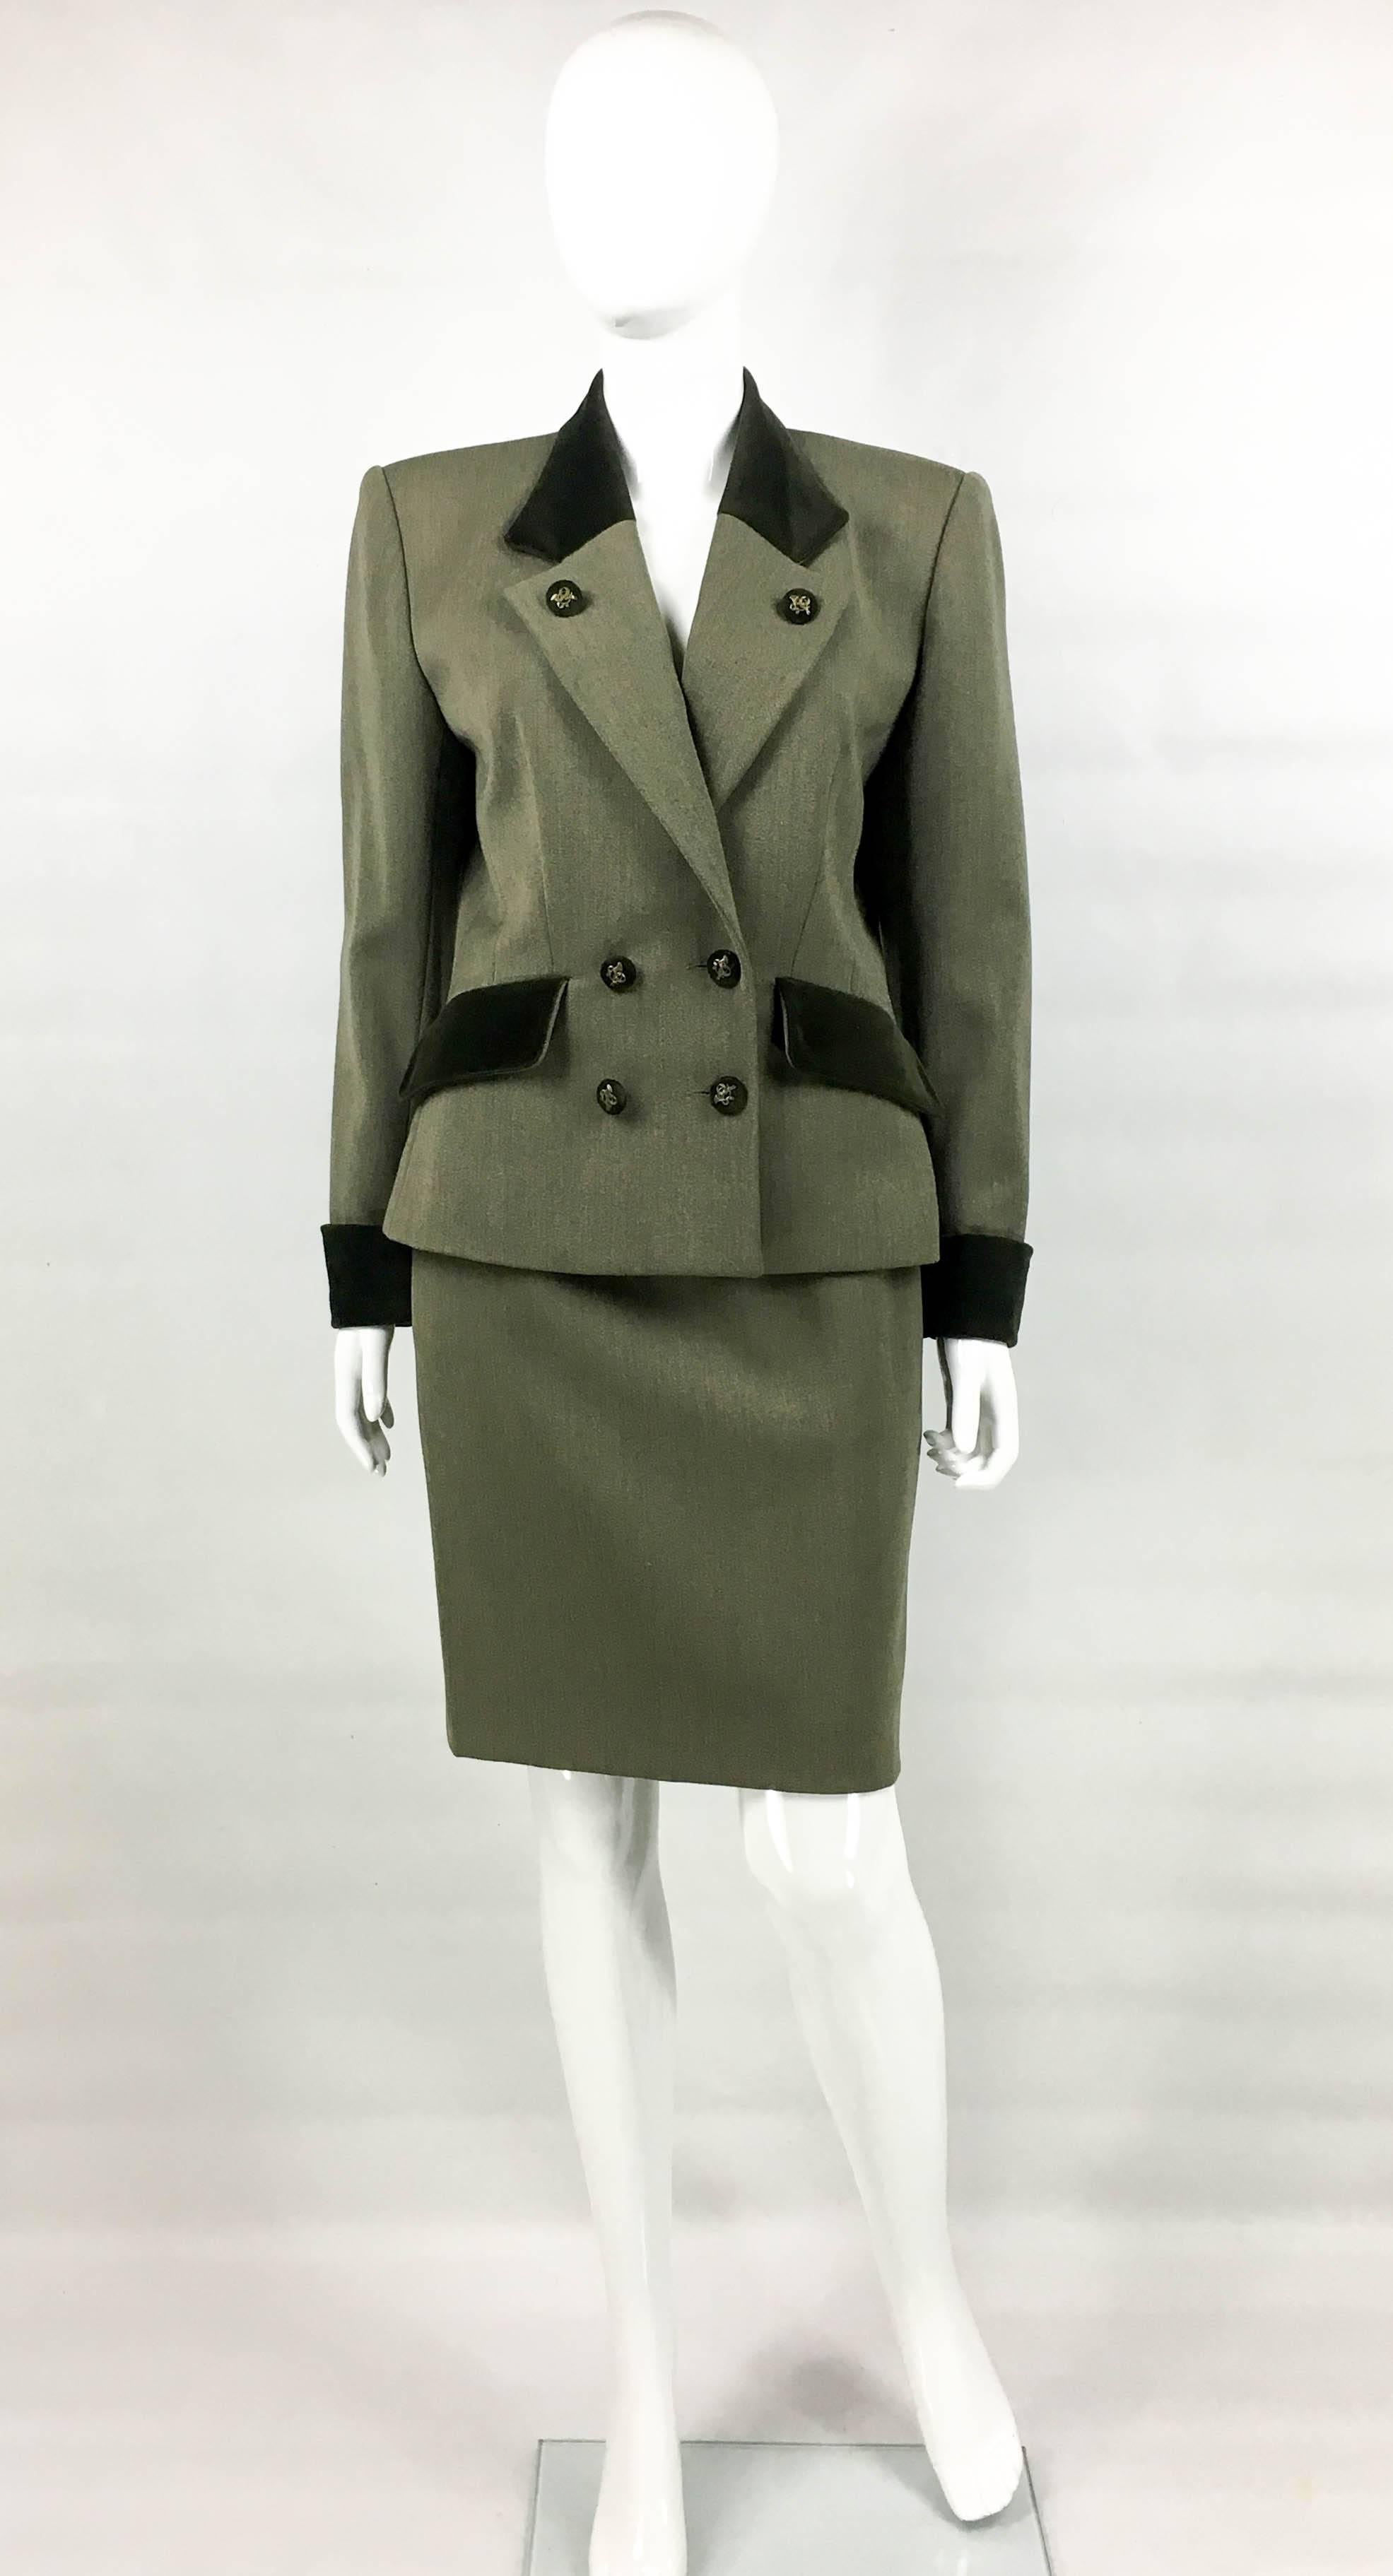 Super Stylish Vintage Hermes Skirt Suit. This very elegant ensemble by Hermes dates back from the 1980’s. Lovat, it is made in wool with velvet details on the collar, pocket flaps, cuffs and on the back. The jacket is double-breasted, with a defined